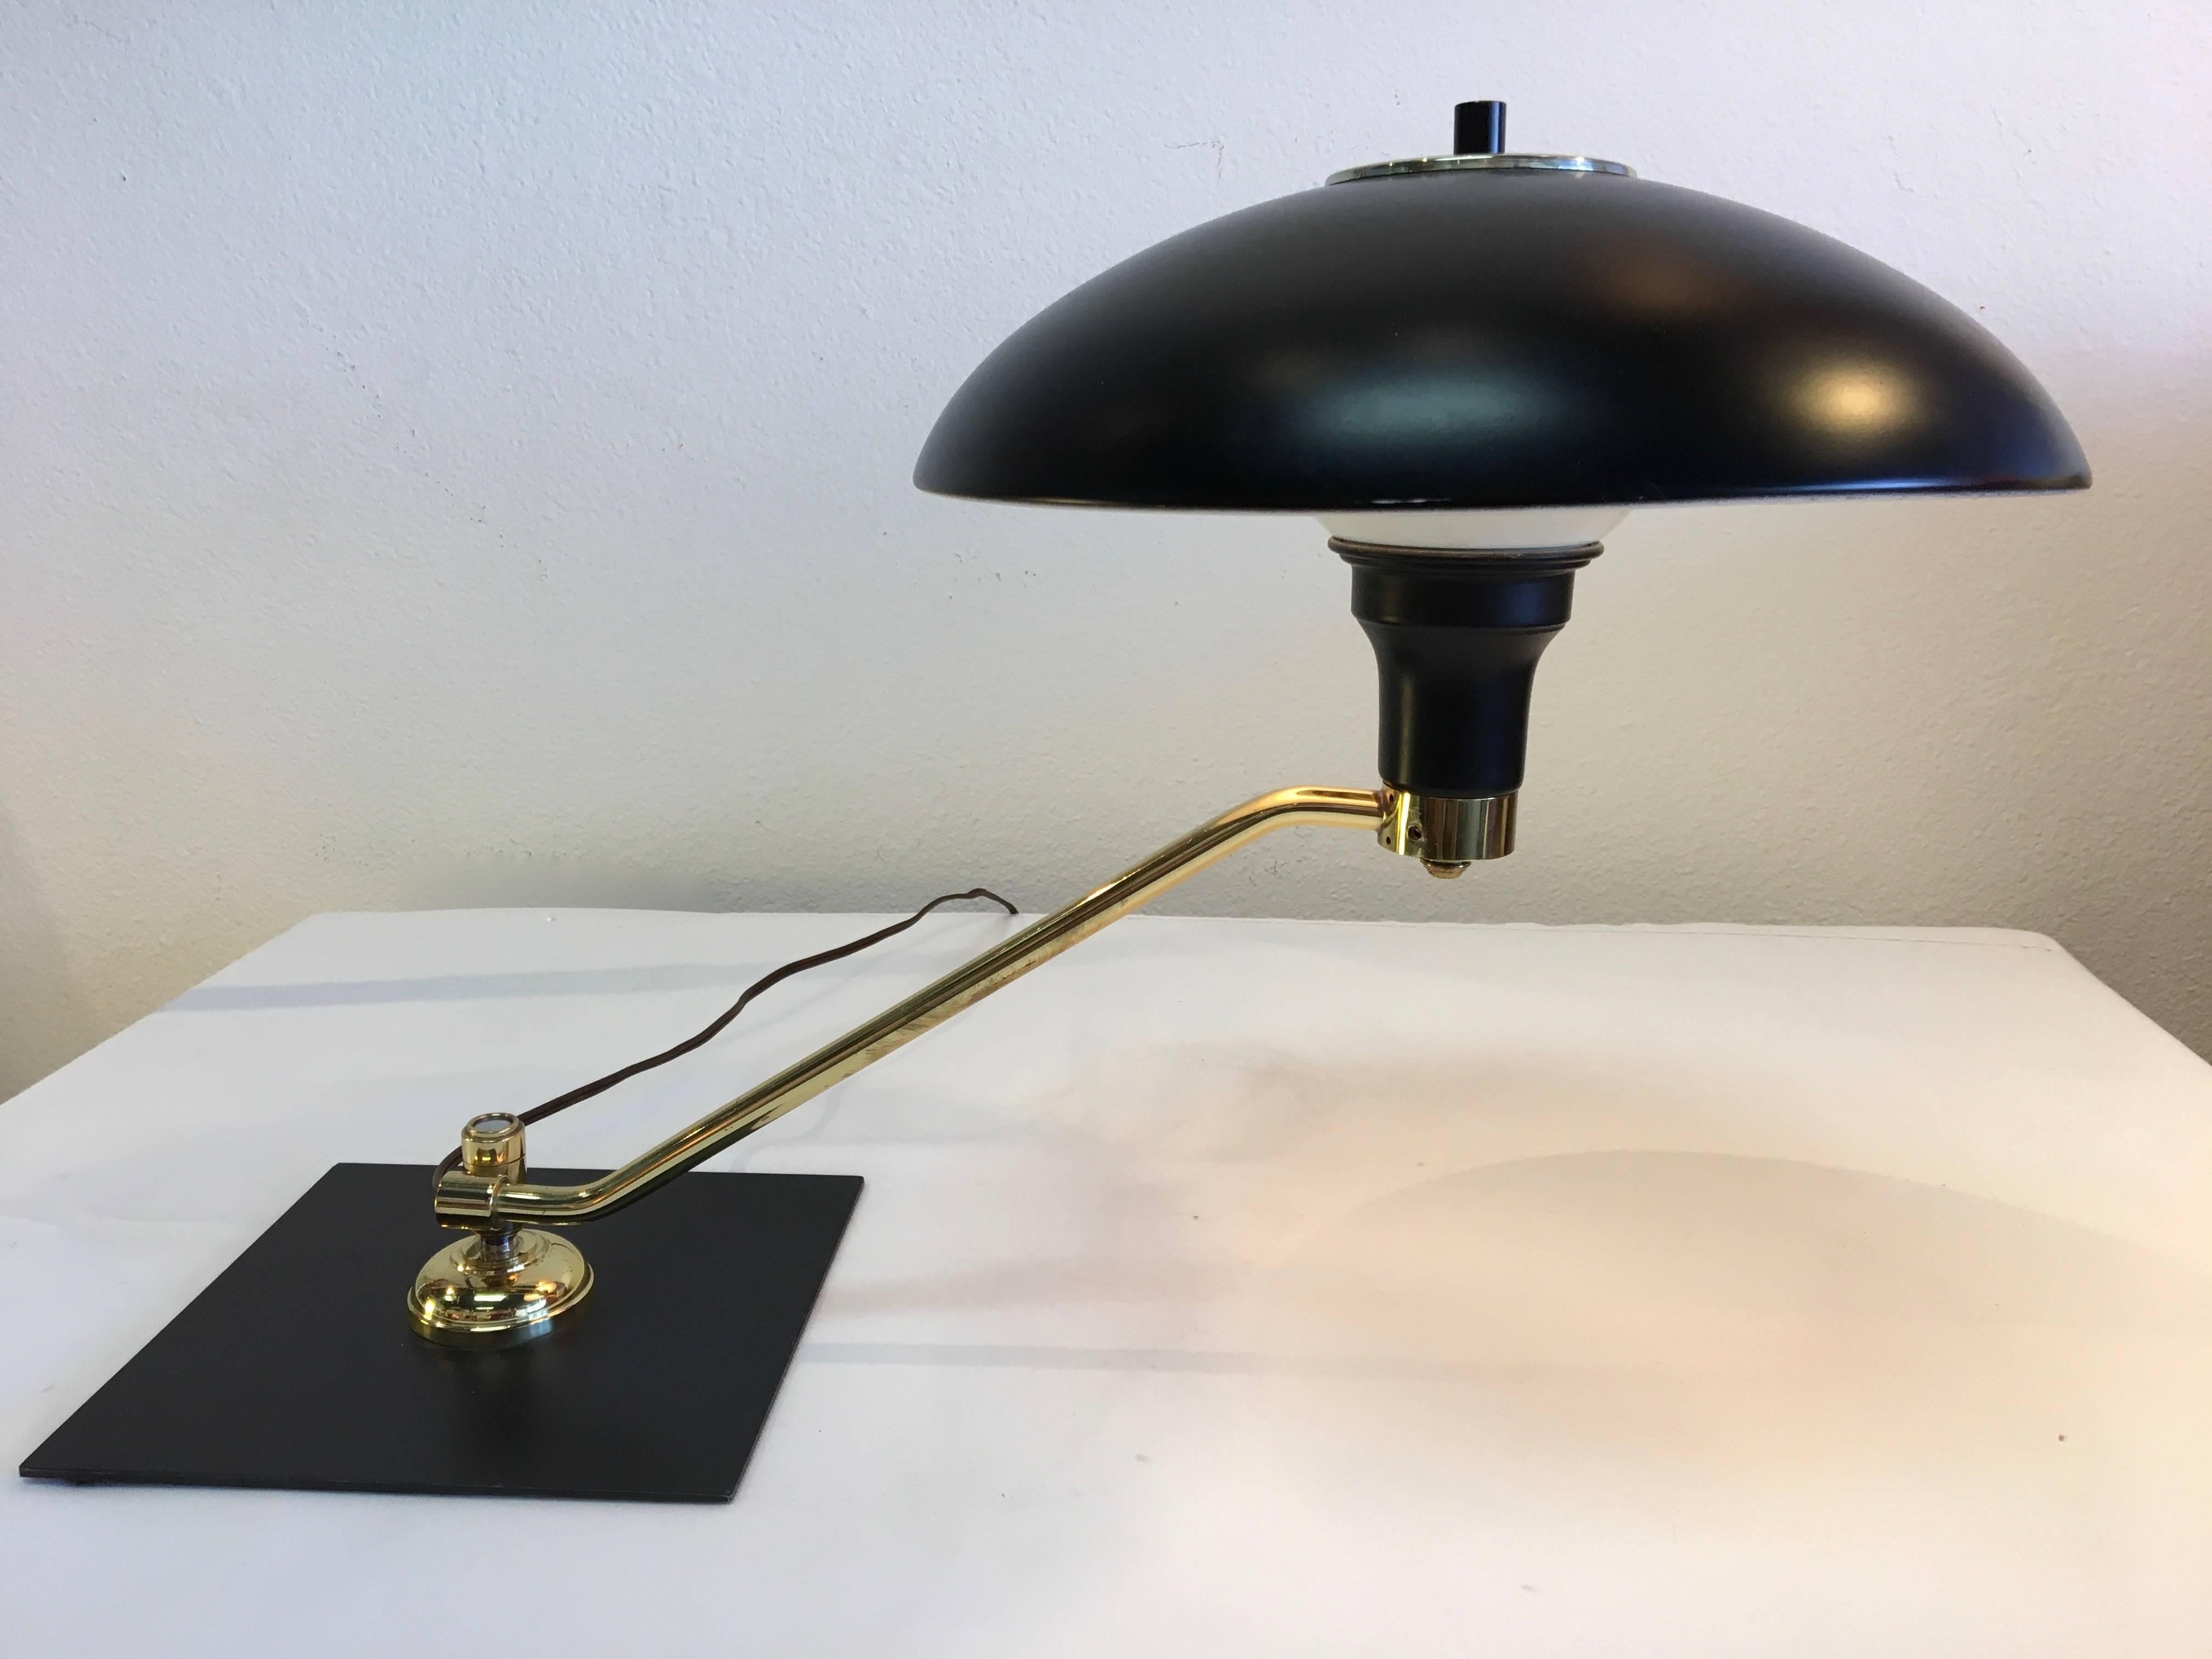 Handsome combination of satin black and polished brass combine with smooth functionality in this striking 1950s task lamp by Gerald Thurston.